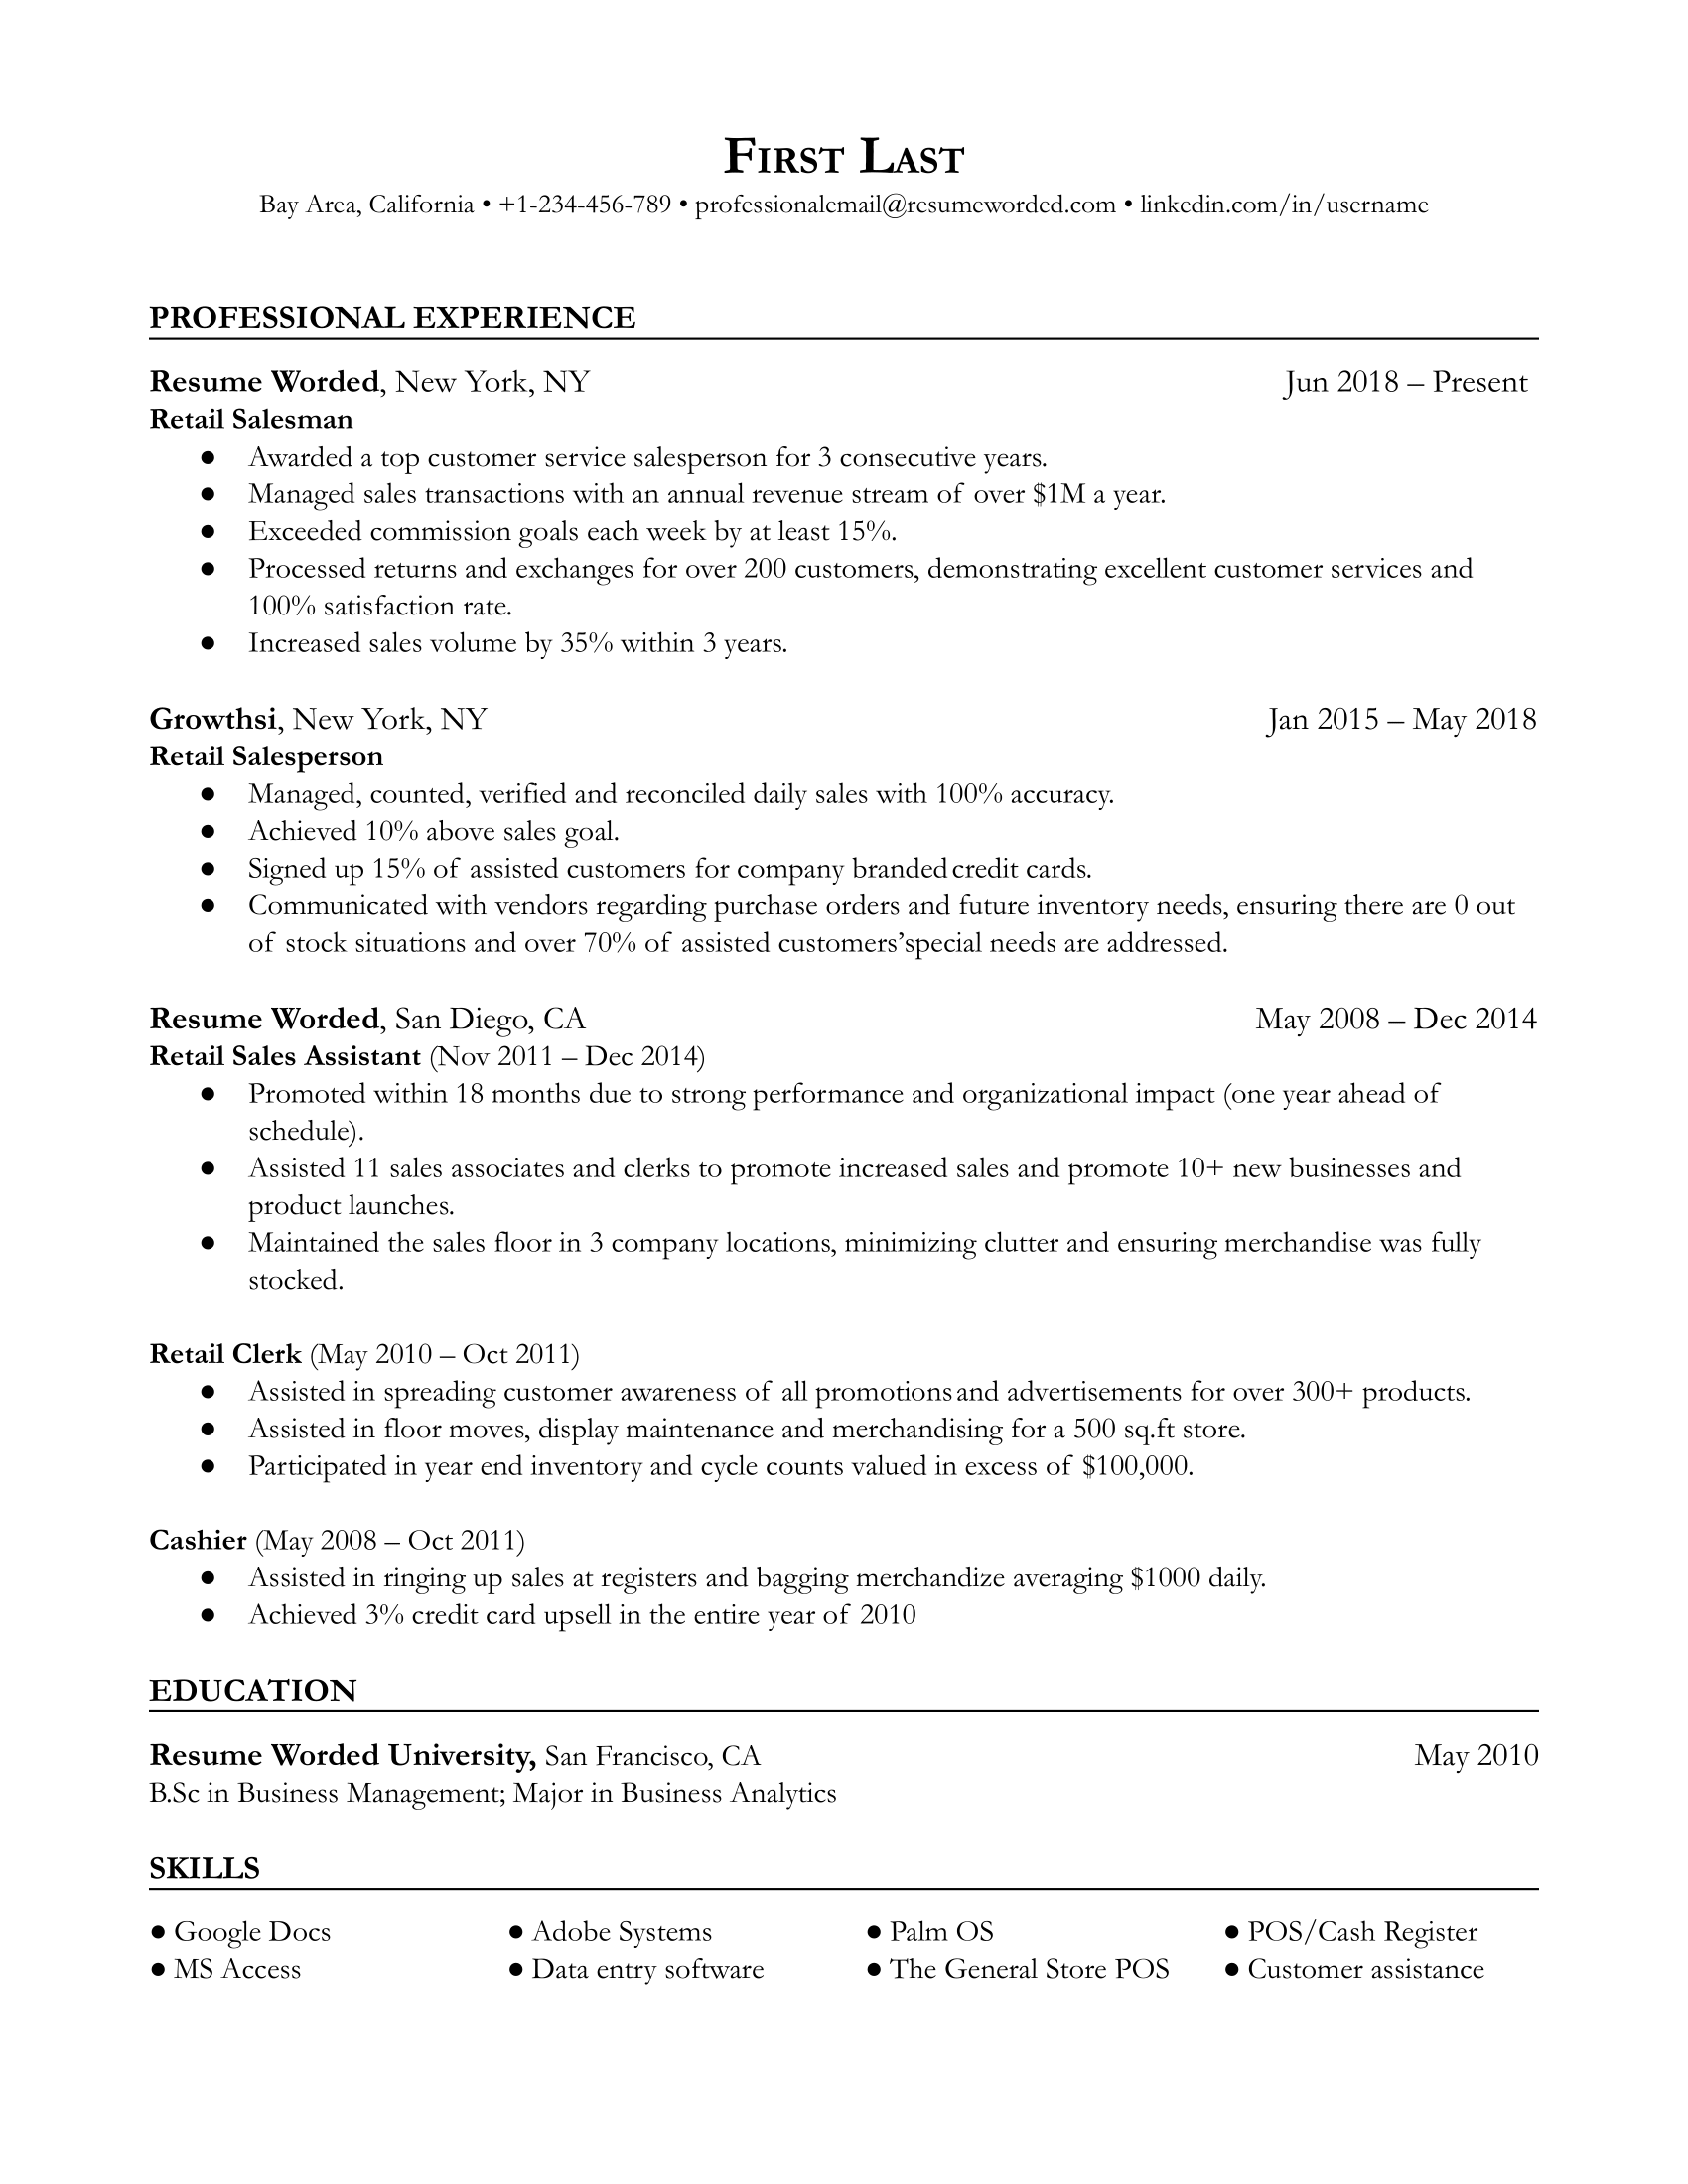 Purchase card resume